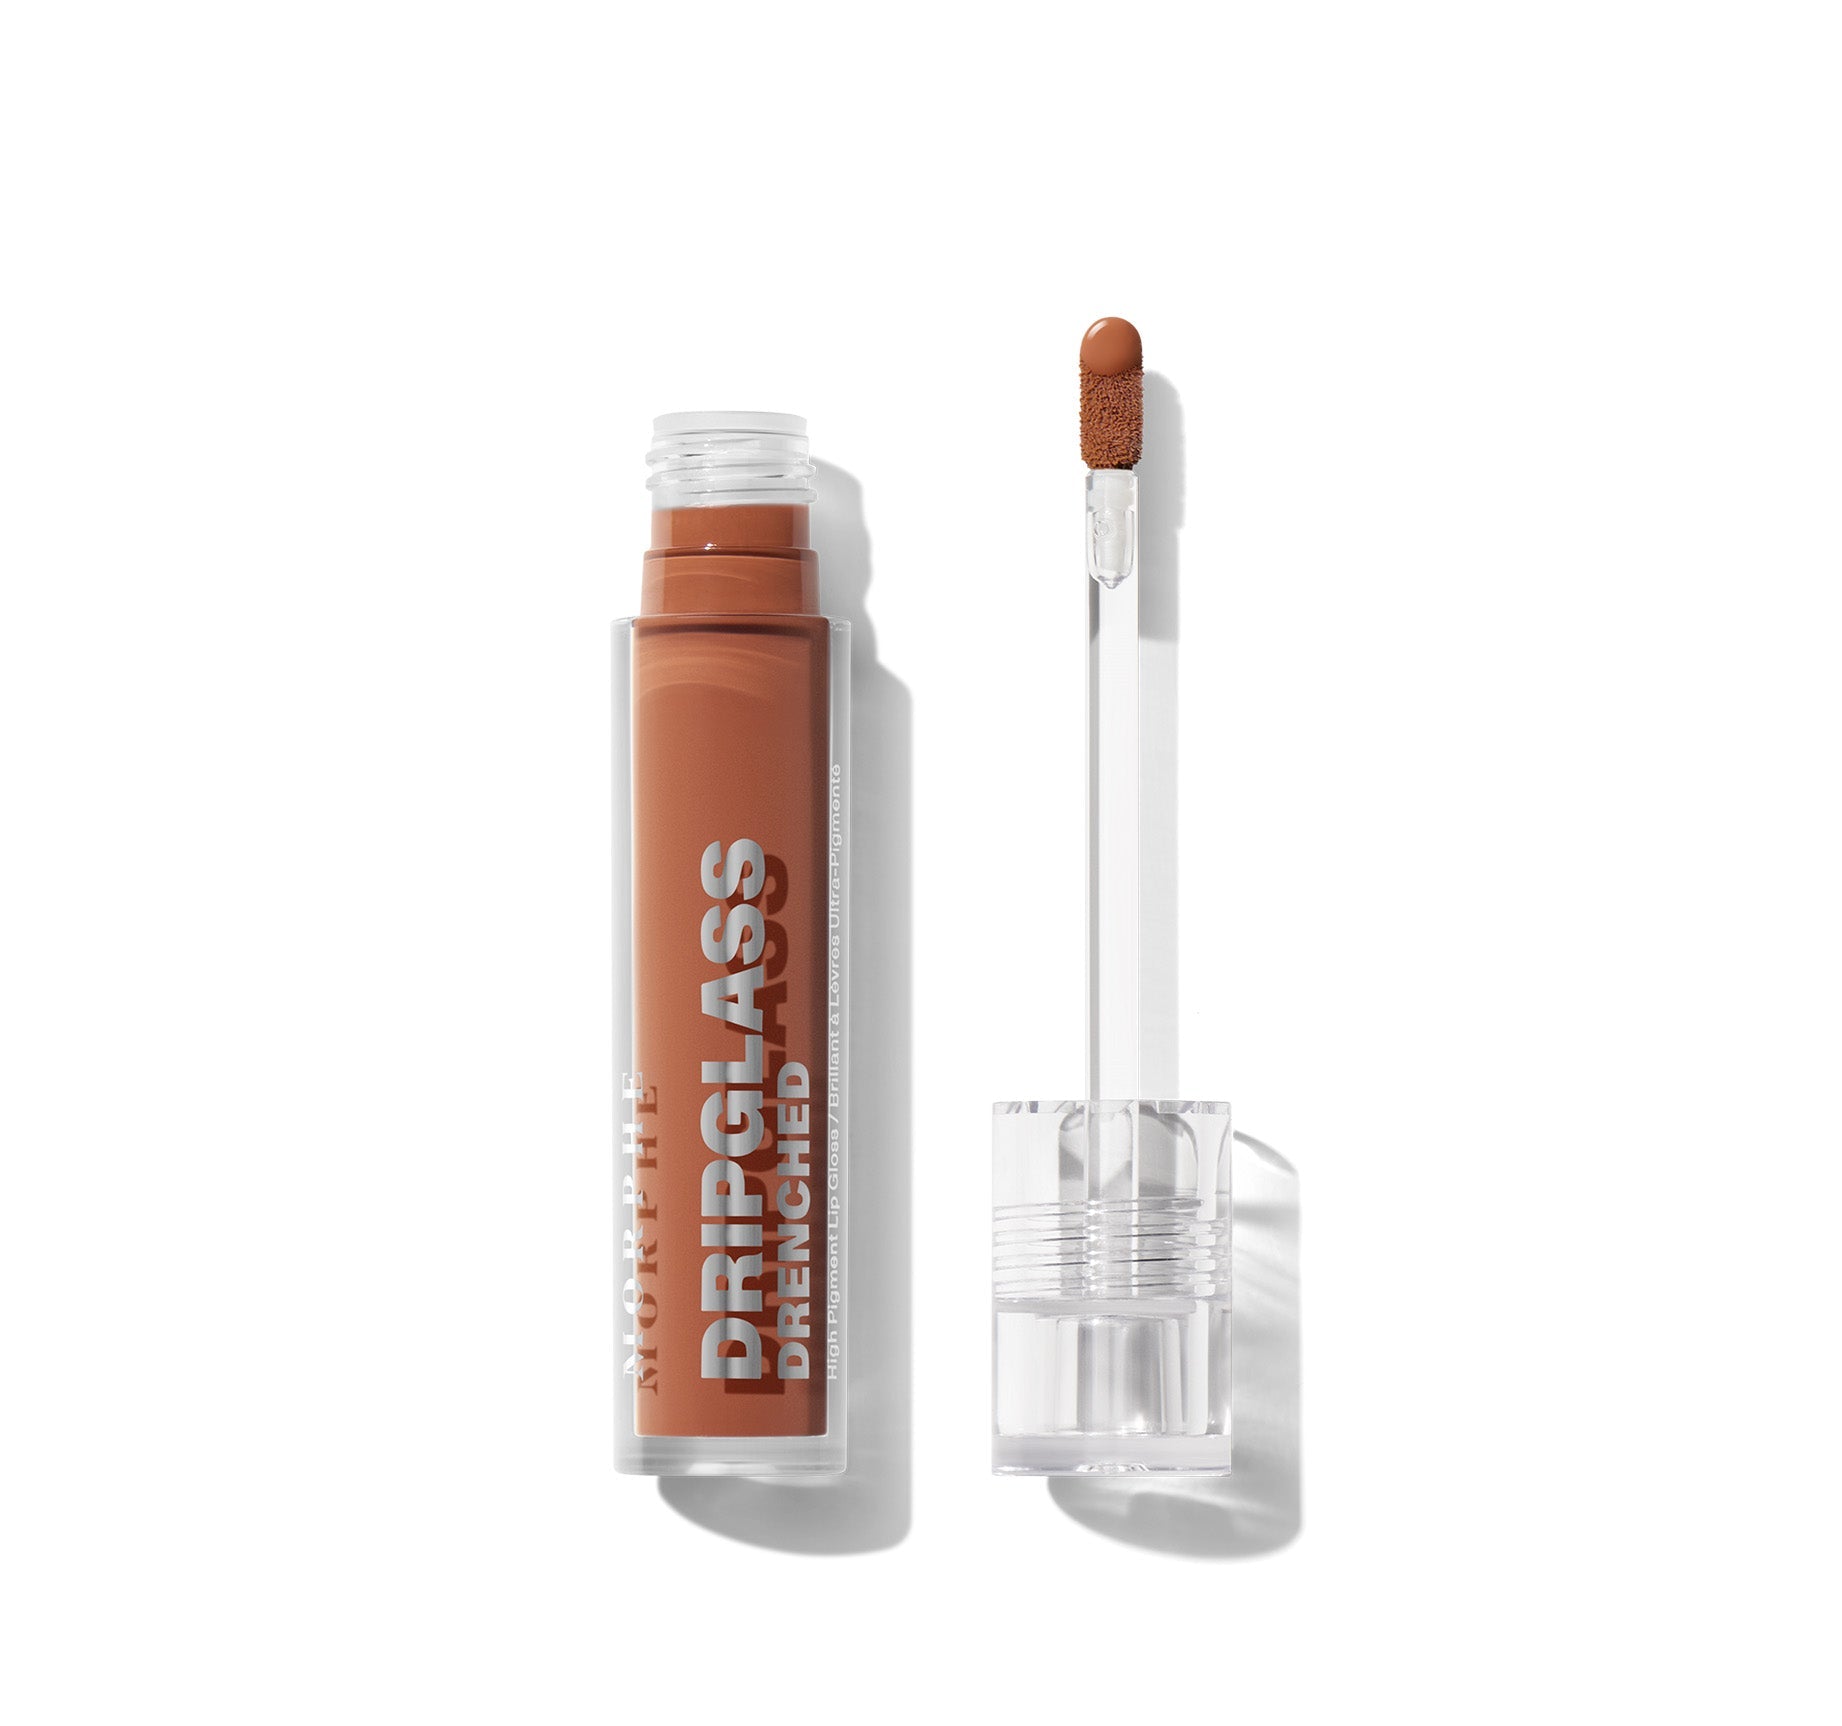 Dripglass Drenched High Pigment Lip Gloss - Drip Coffee - Image 1